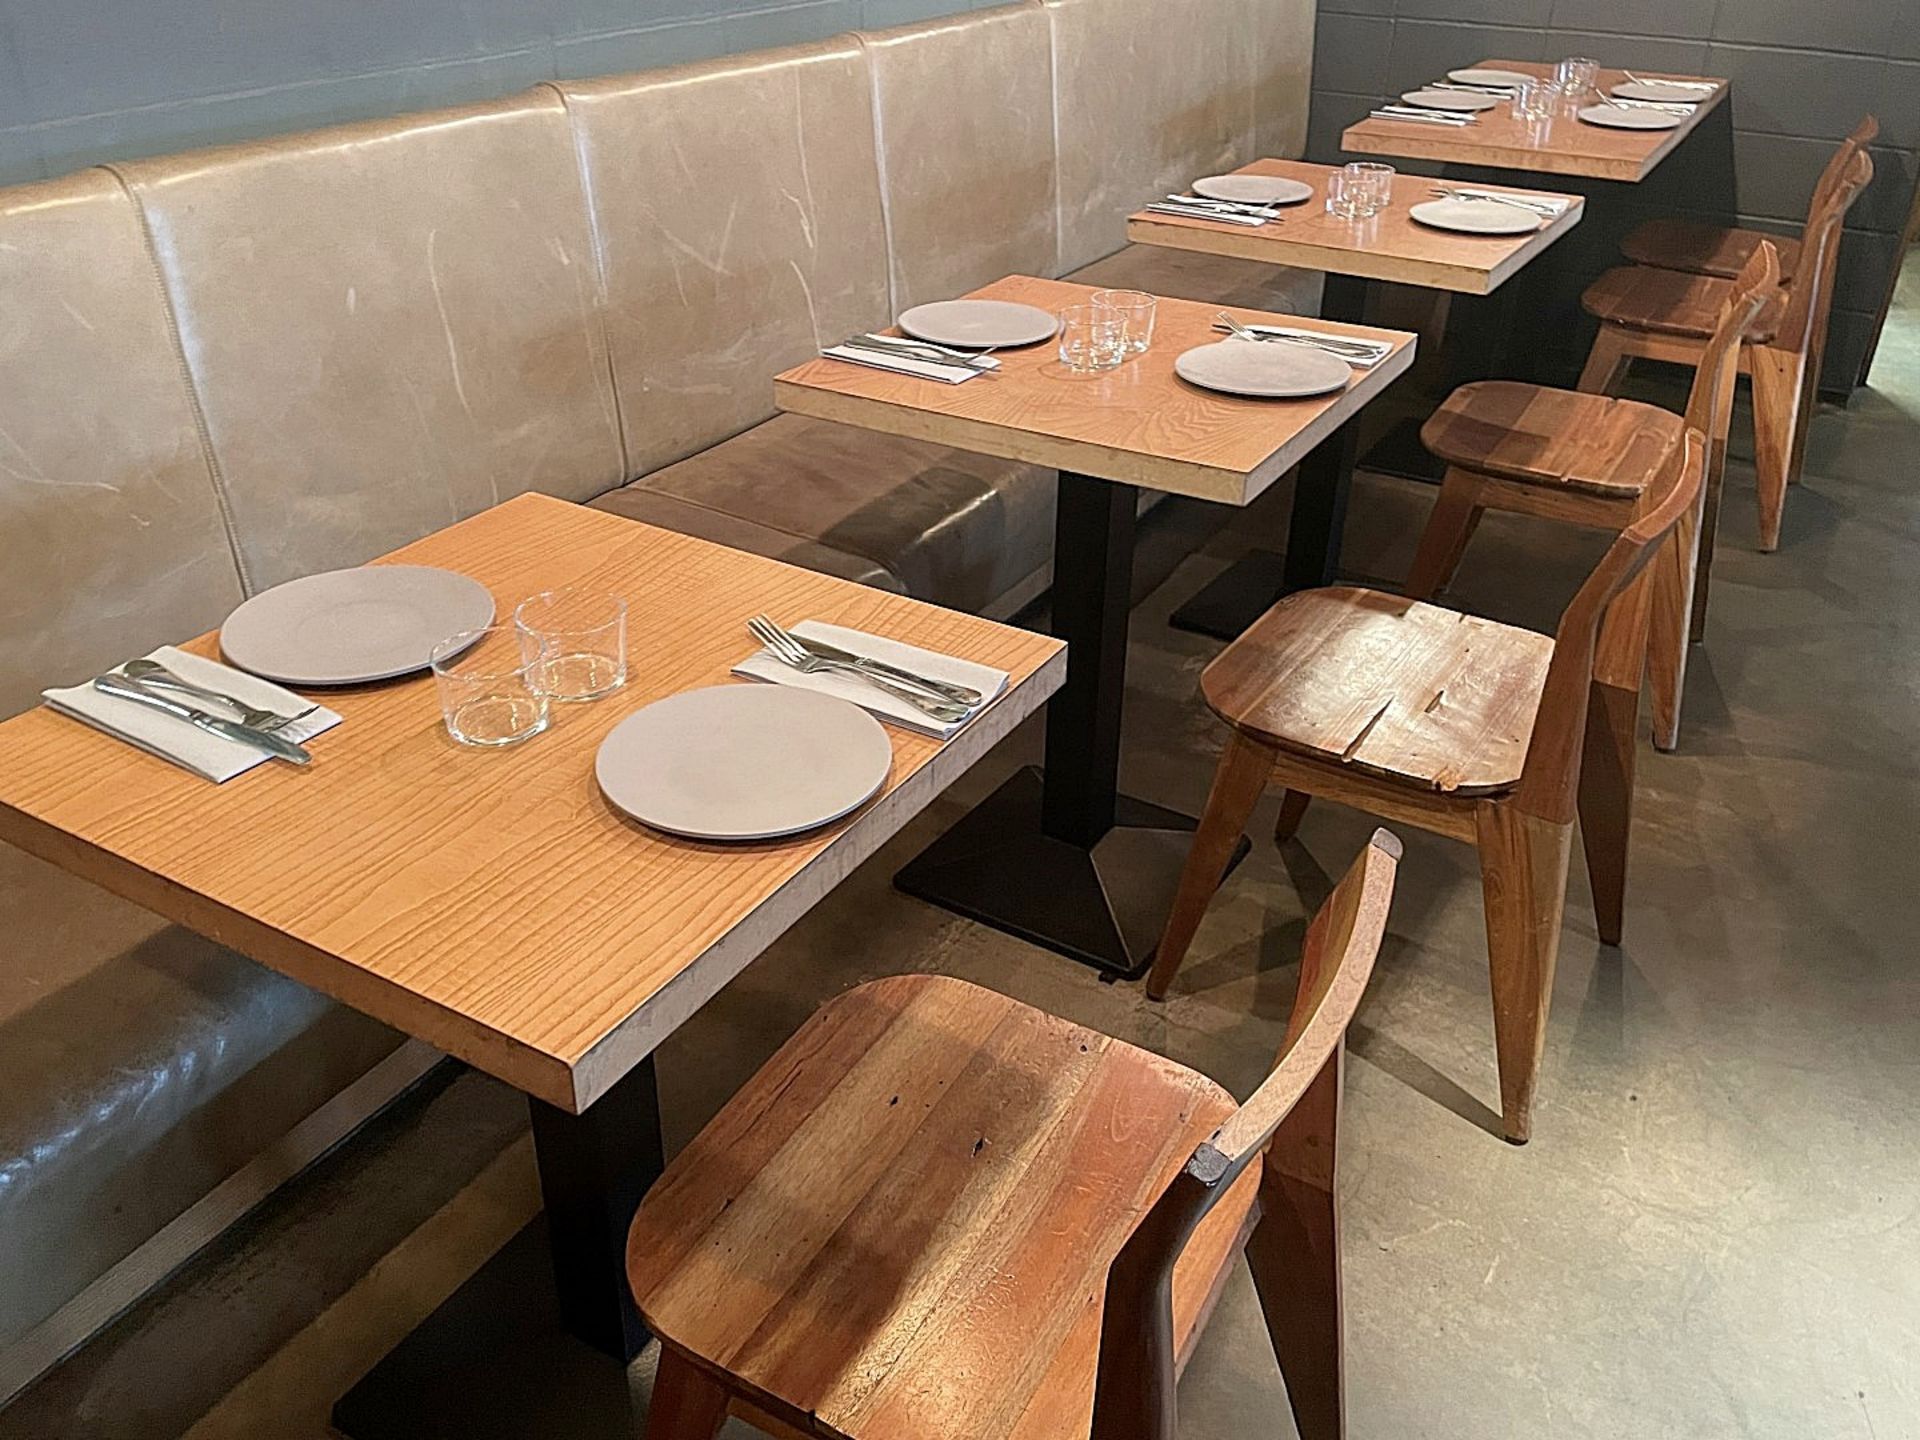 10 x Square Bistro Tables Featuring Wooden Tops And Sturdy Metal Bases - Dimensions To Follow - Ref: - Image 5 of 6